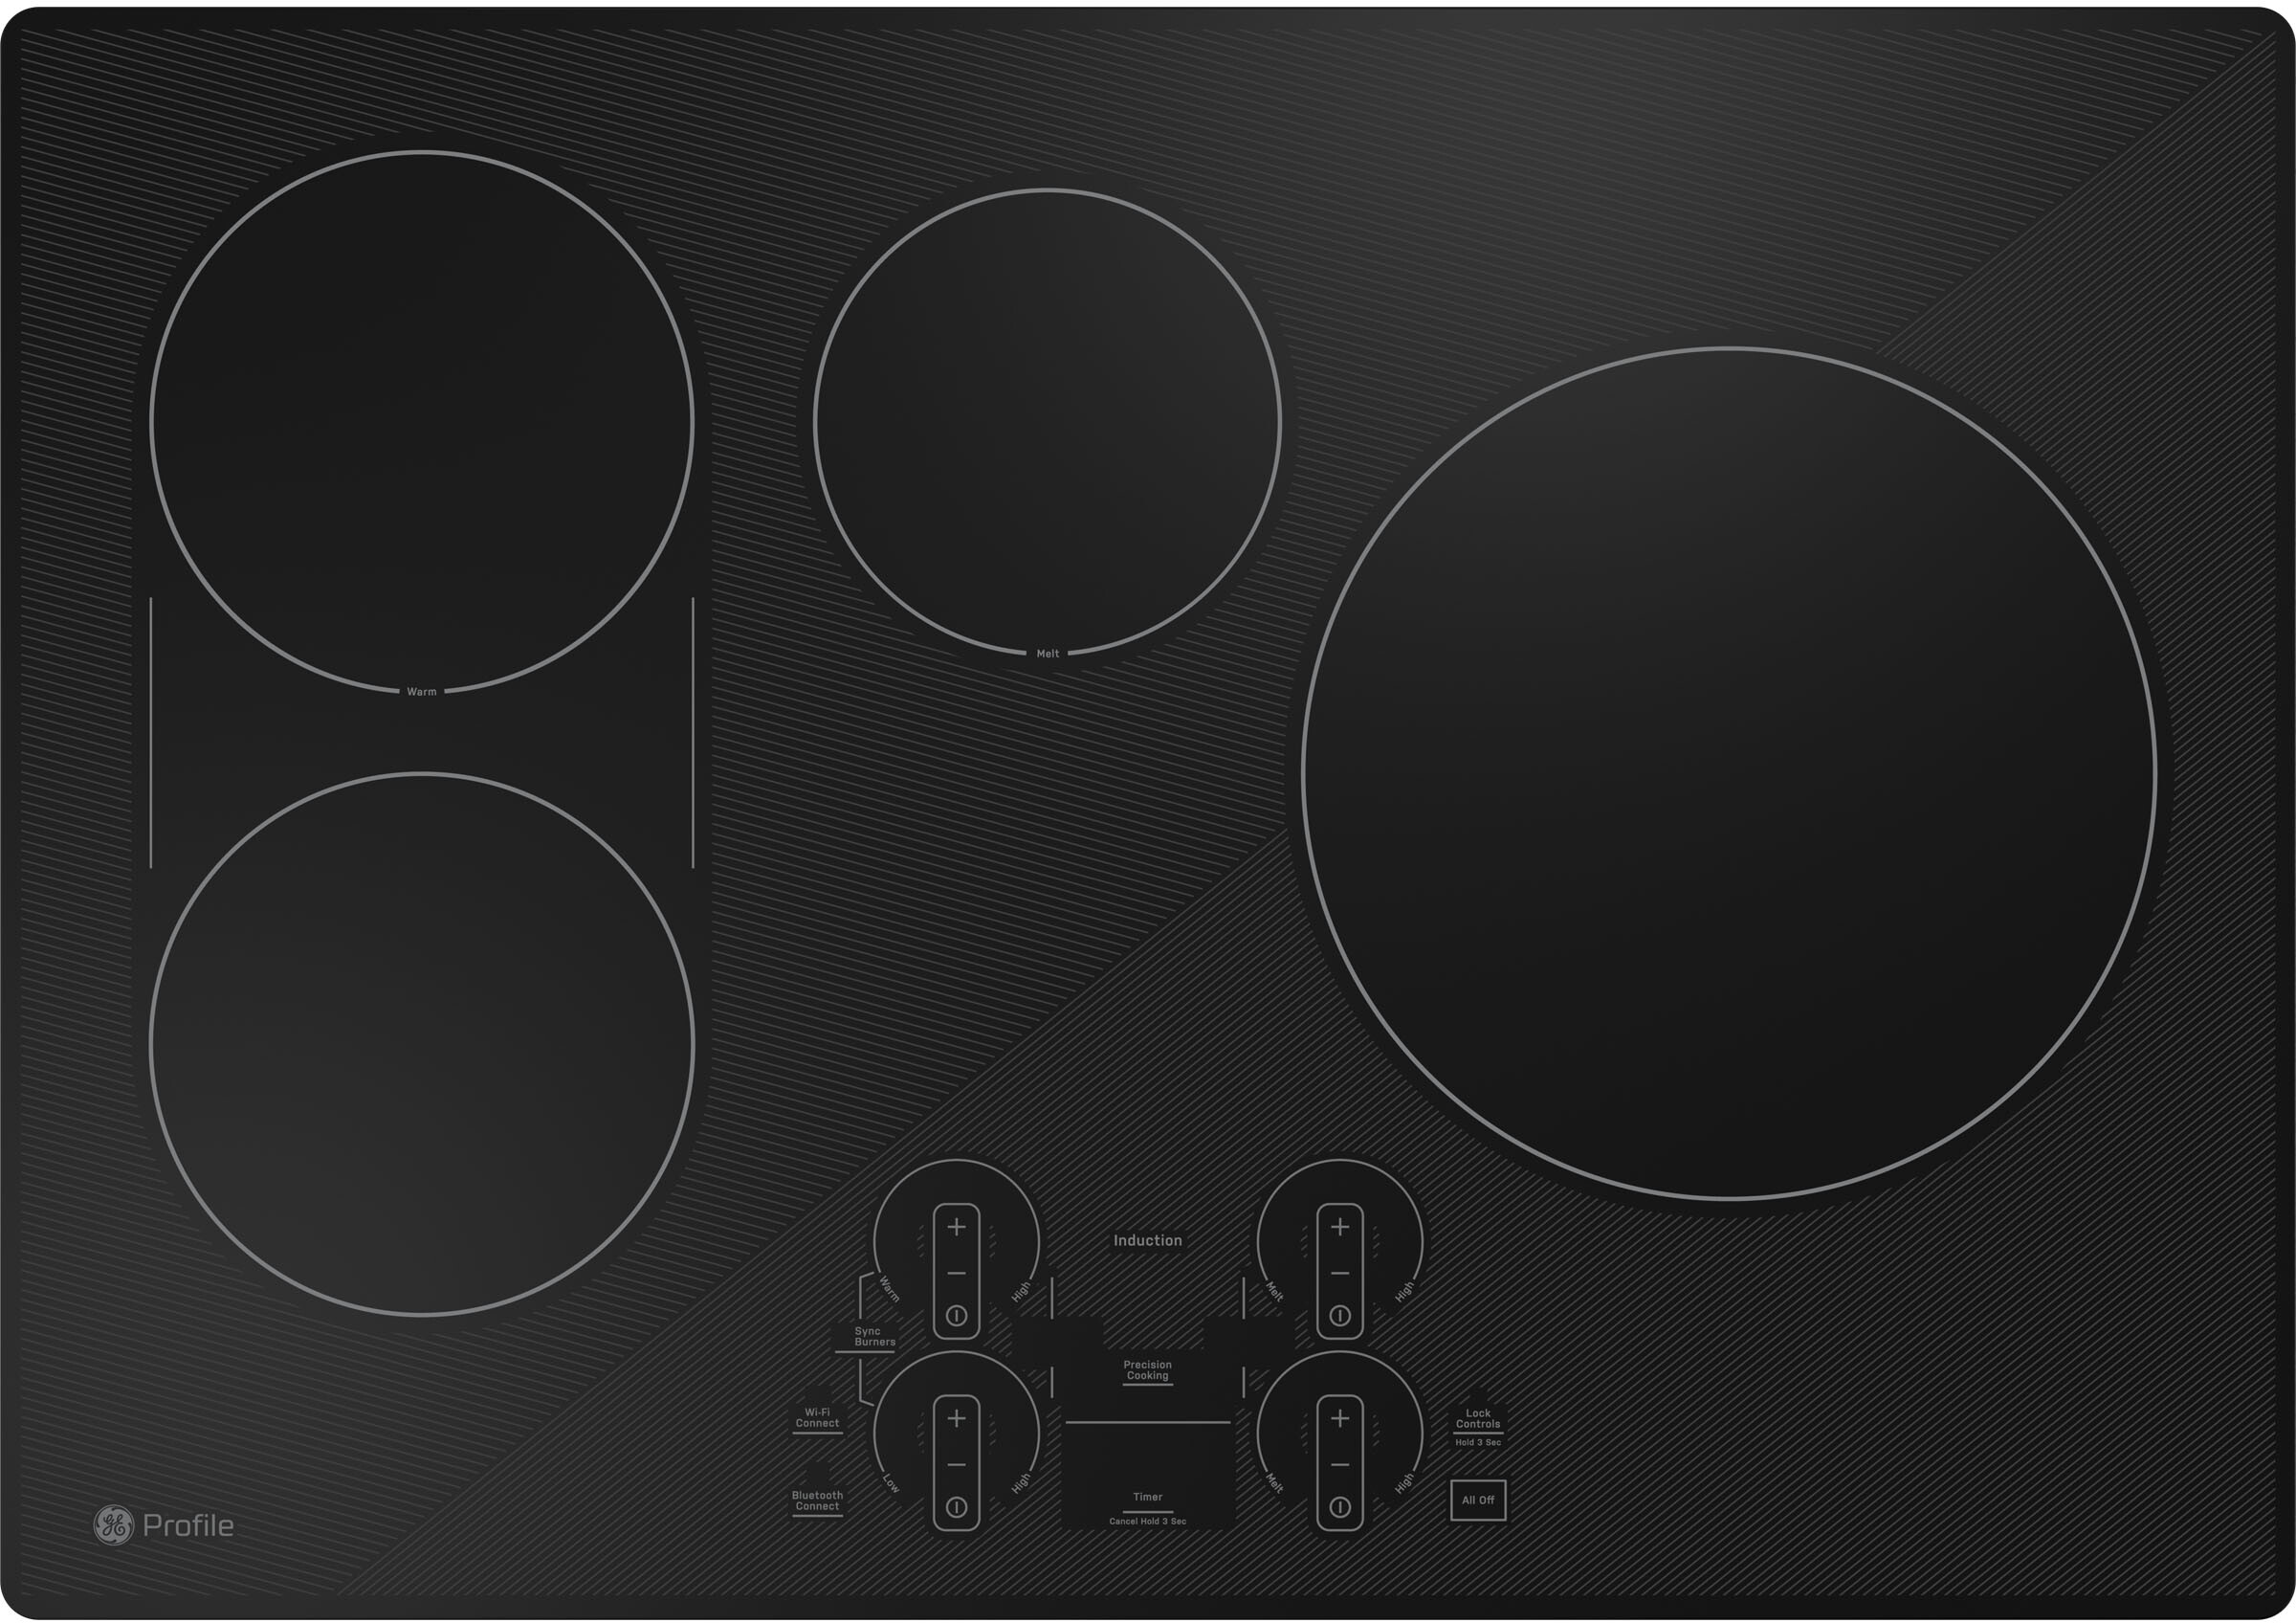 Profile 30"" Induction Drop-In Cooktop - GE PHP9030DTBB